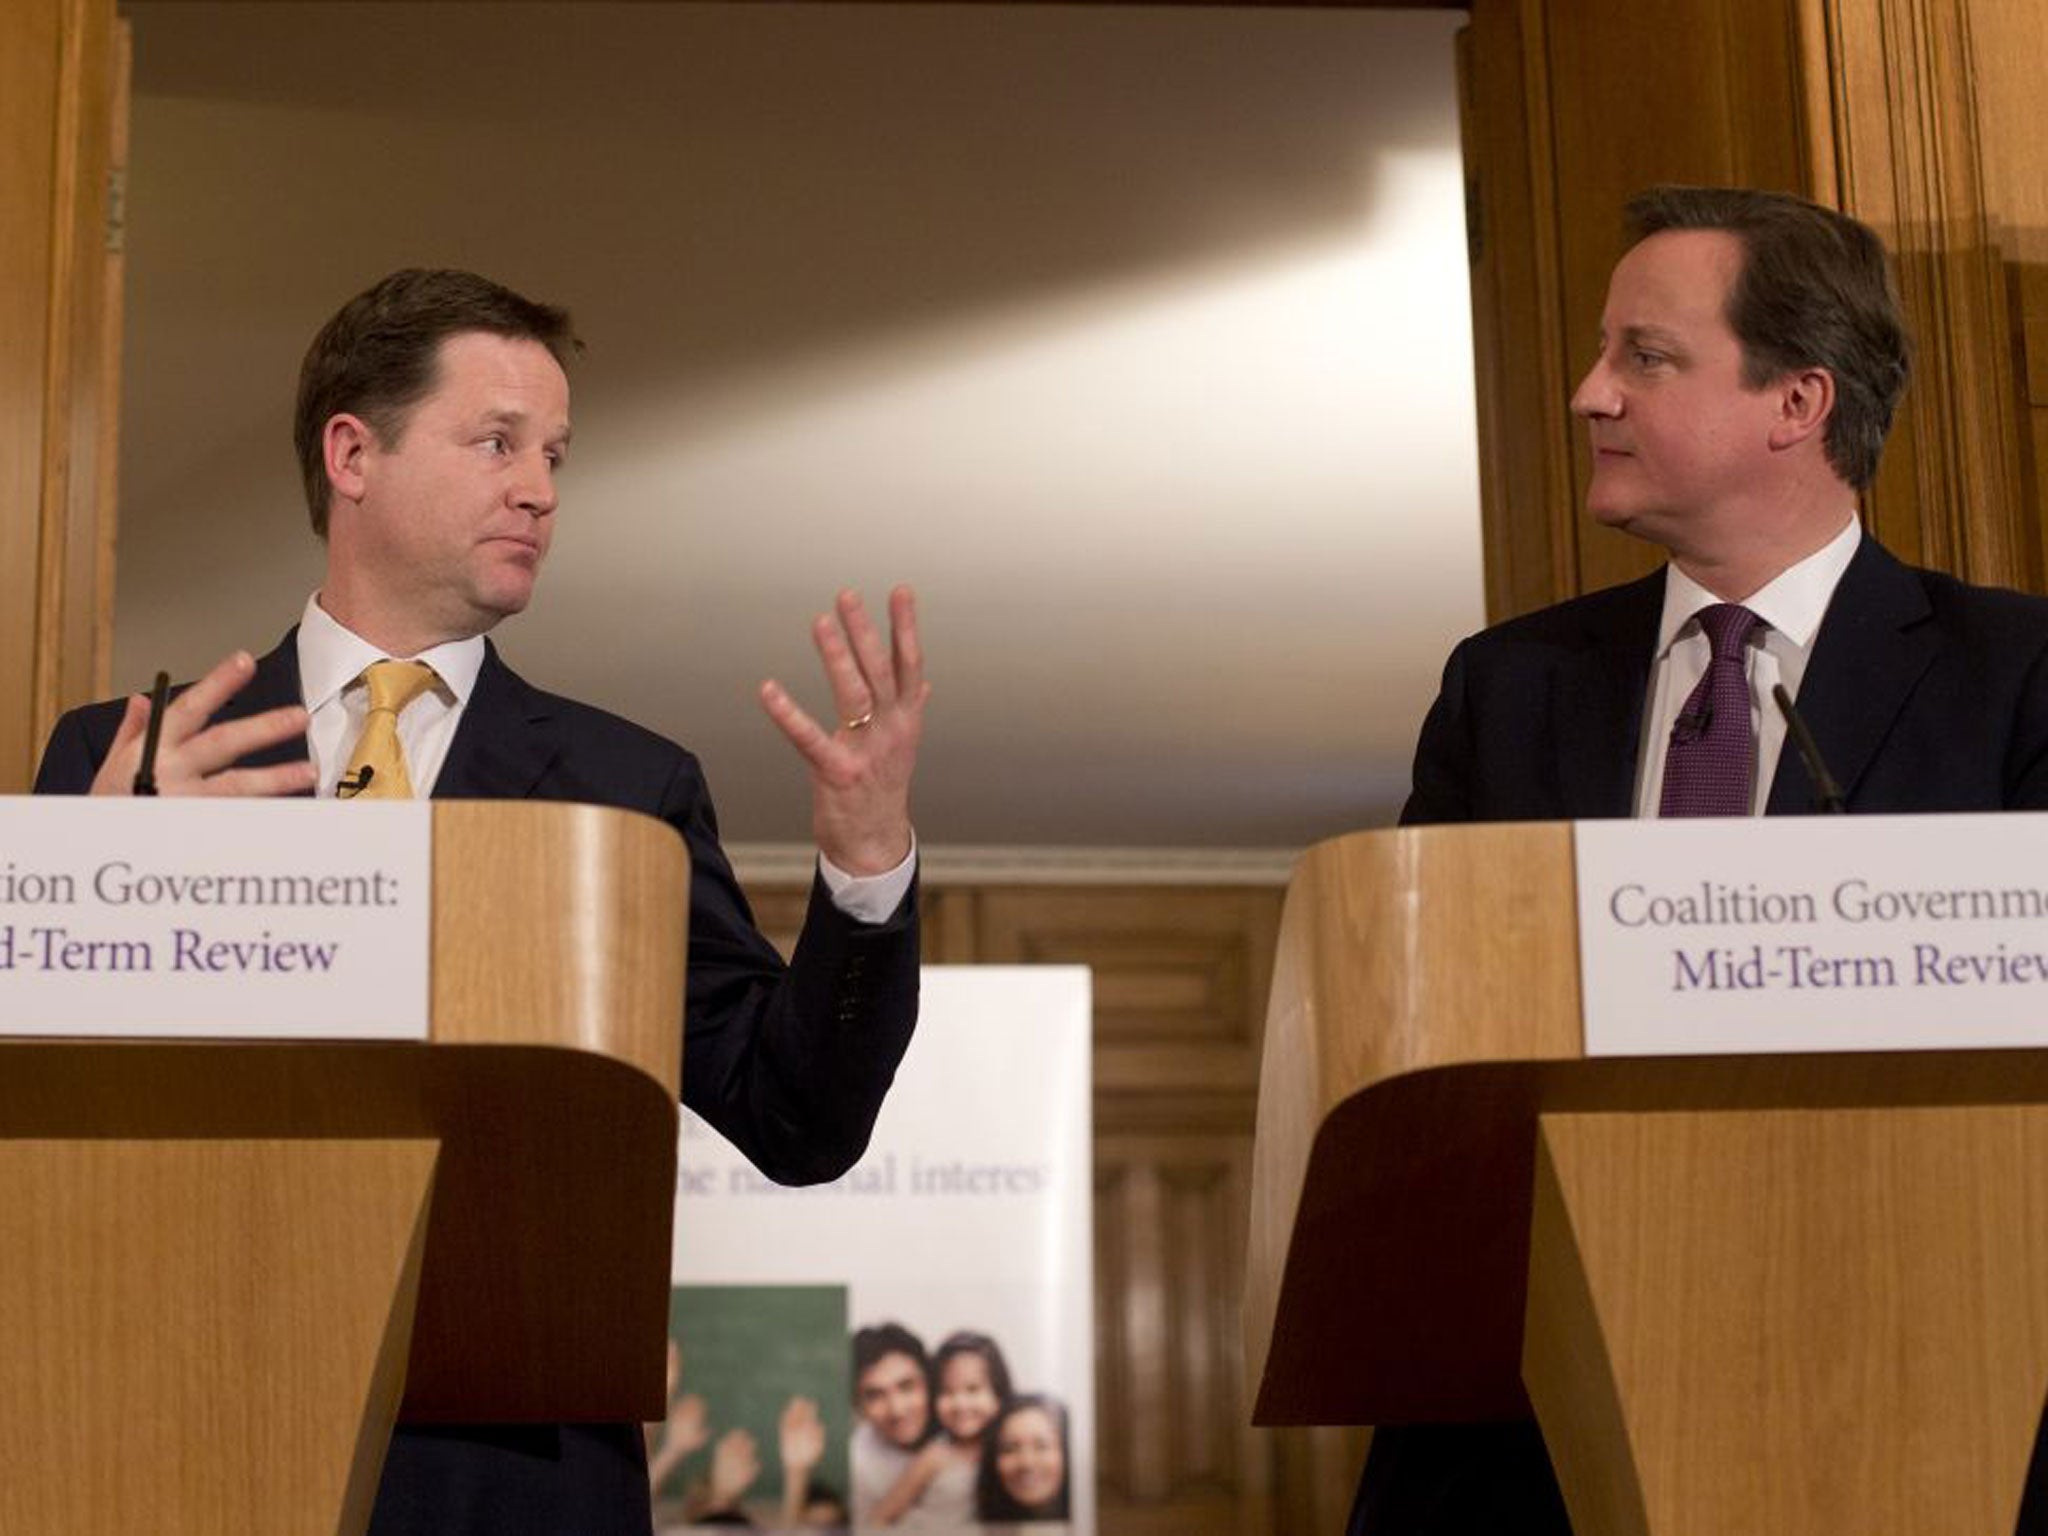 David Cameron and Nick Clegg during their joint press conference in 10 Downing Street yesterday